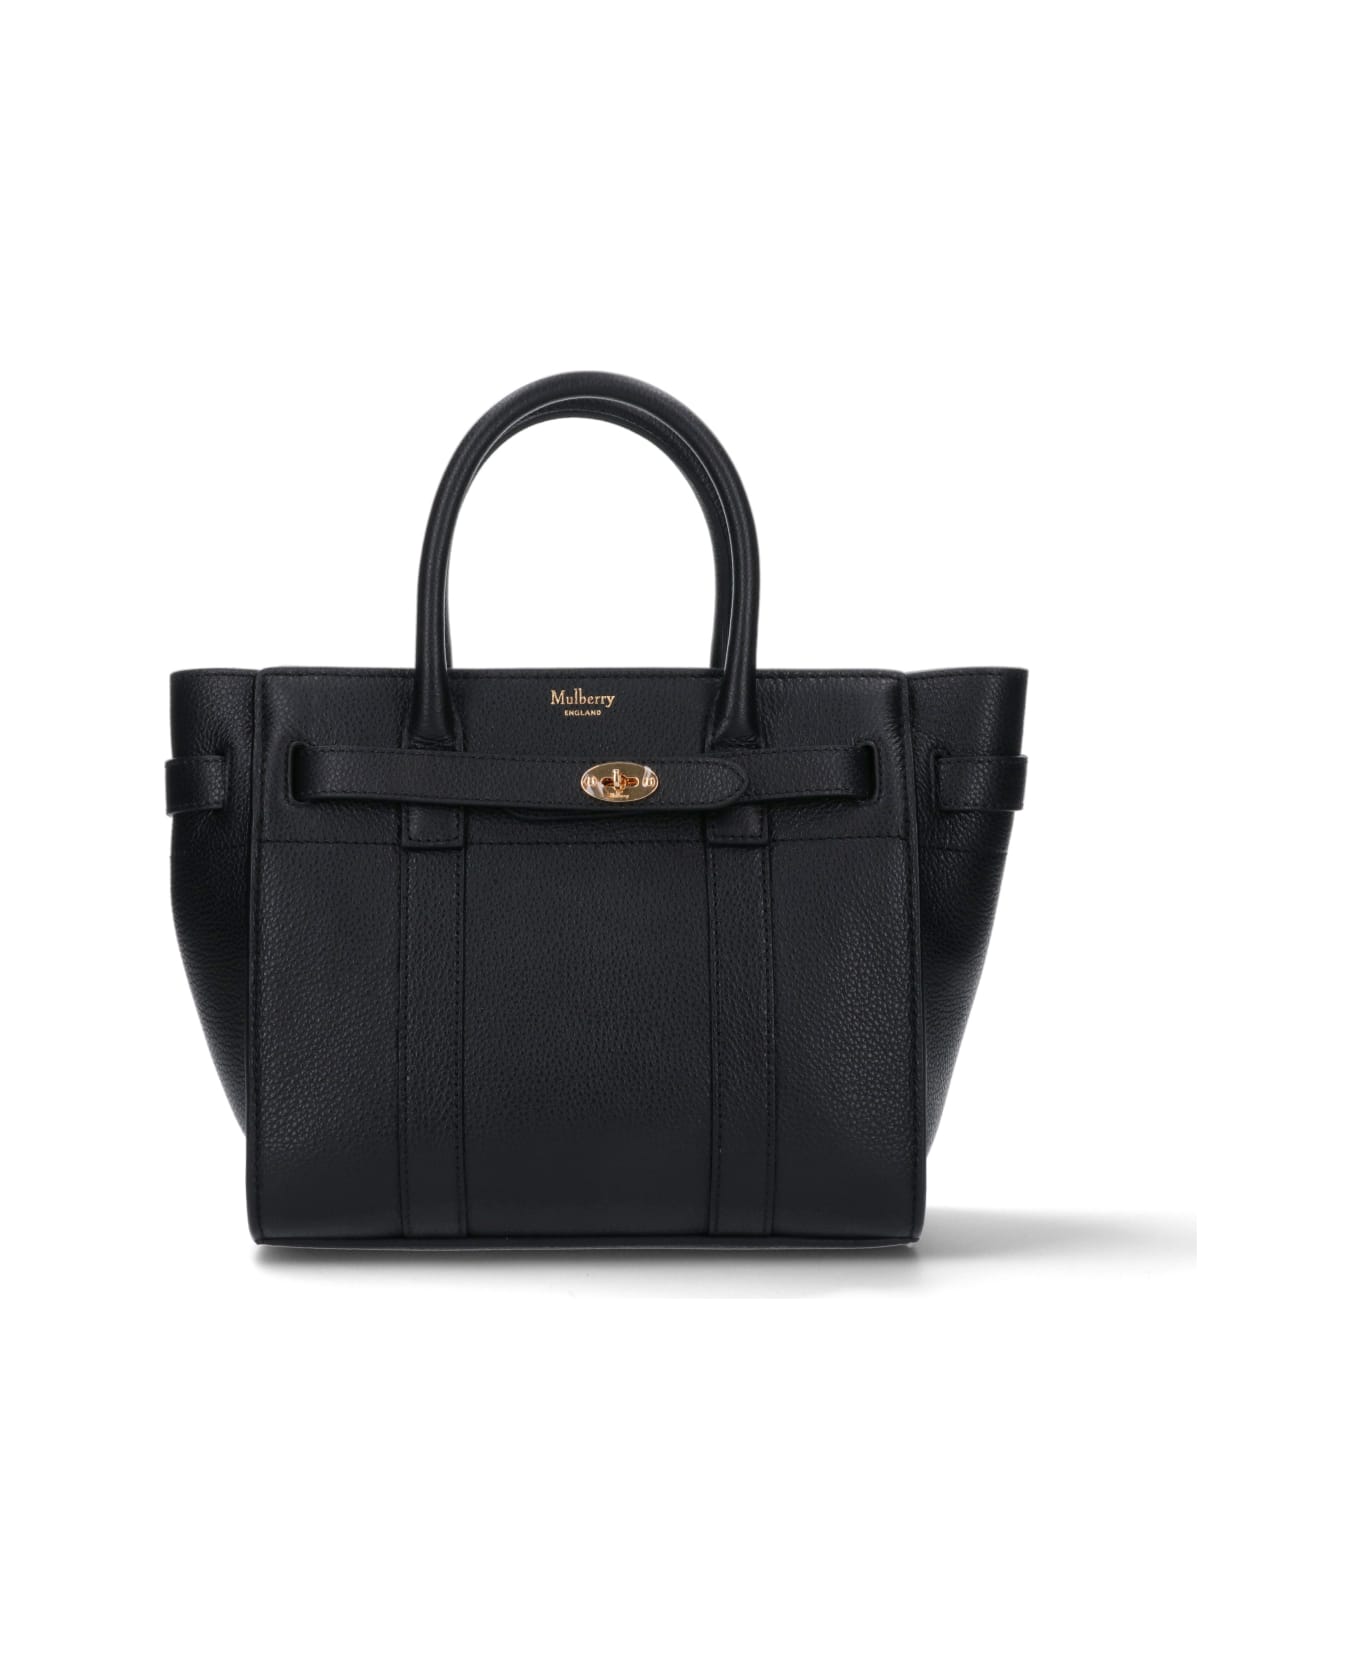 Mulberry Tote - Black